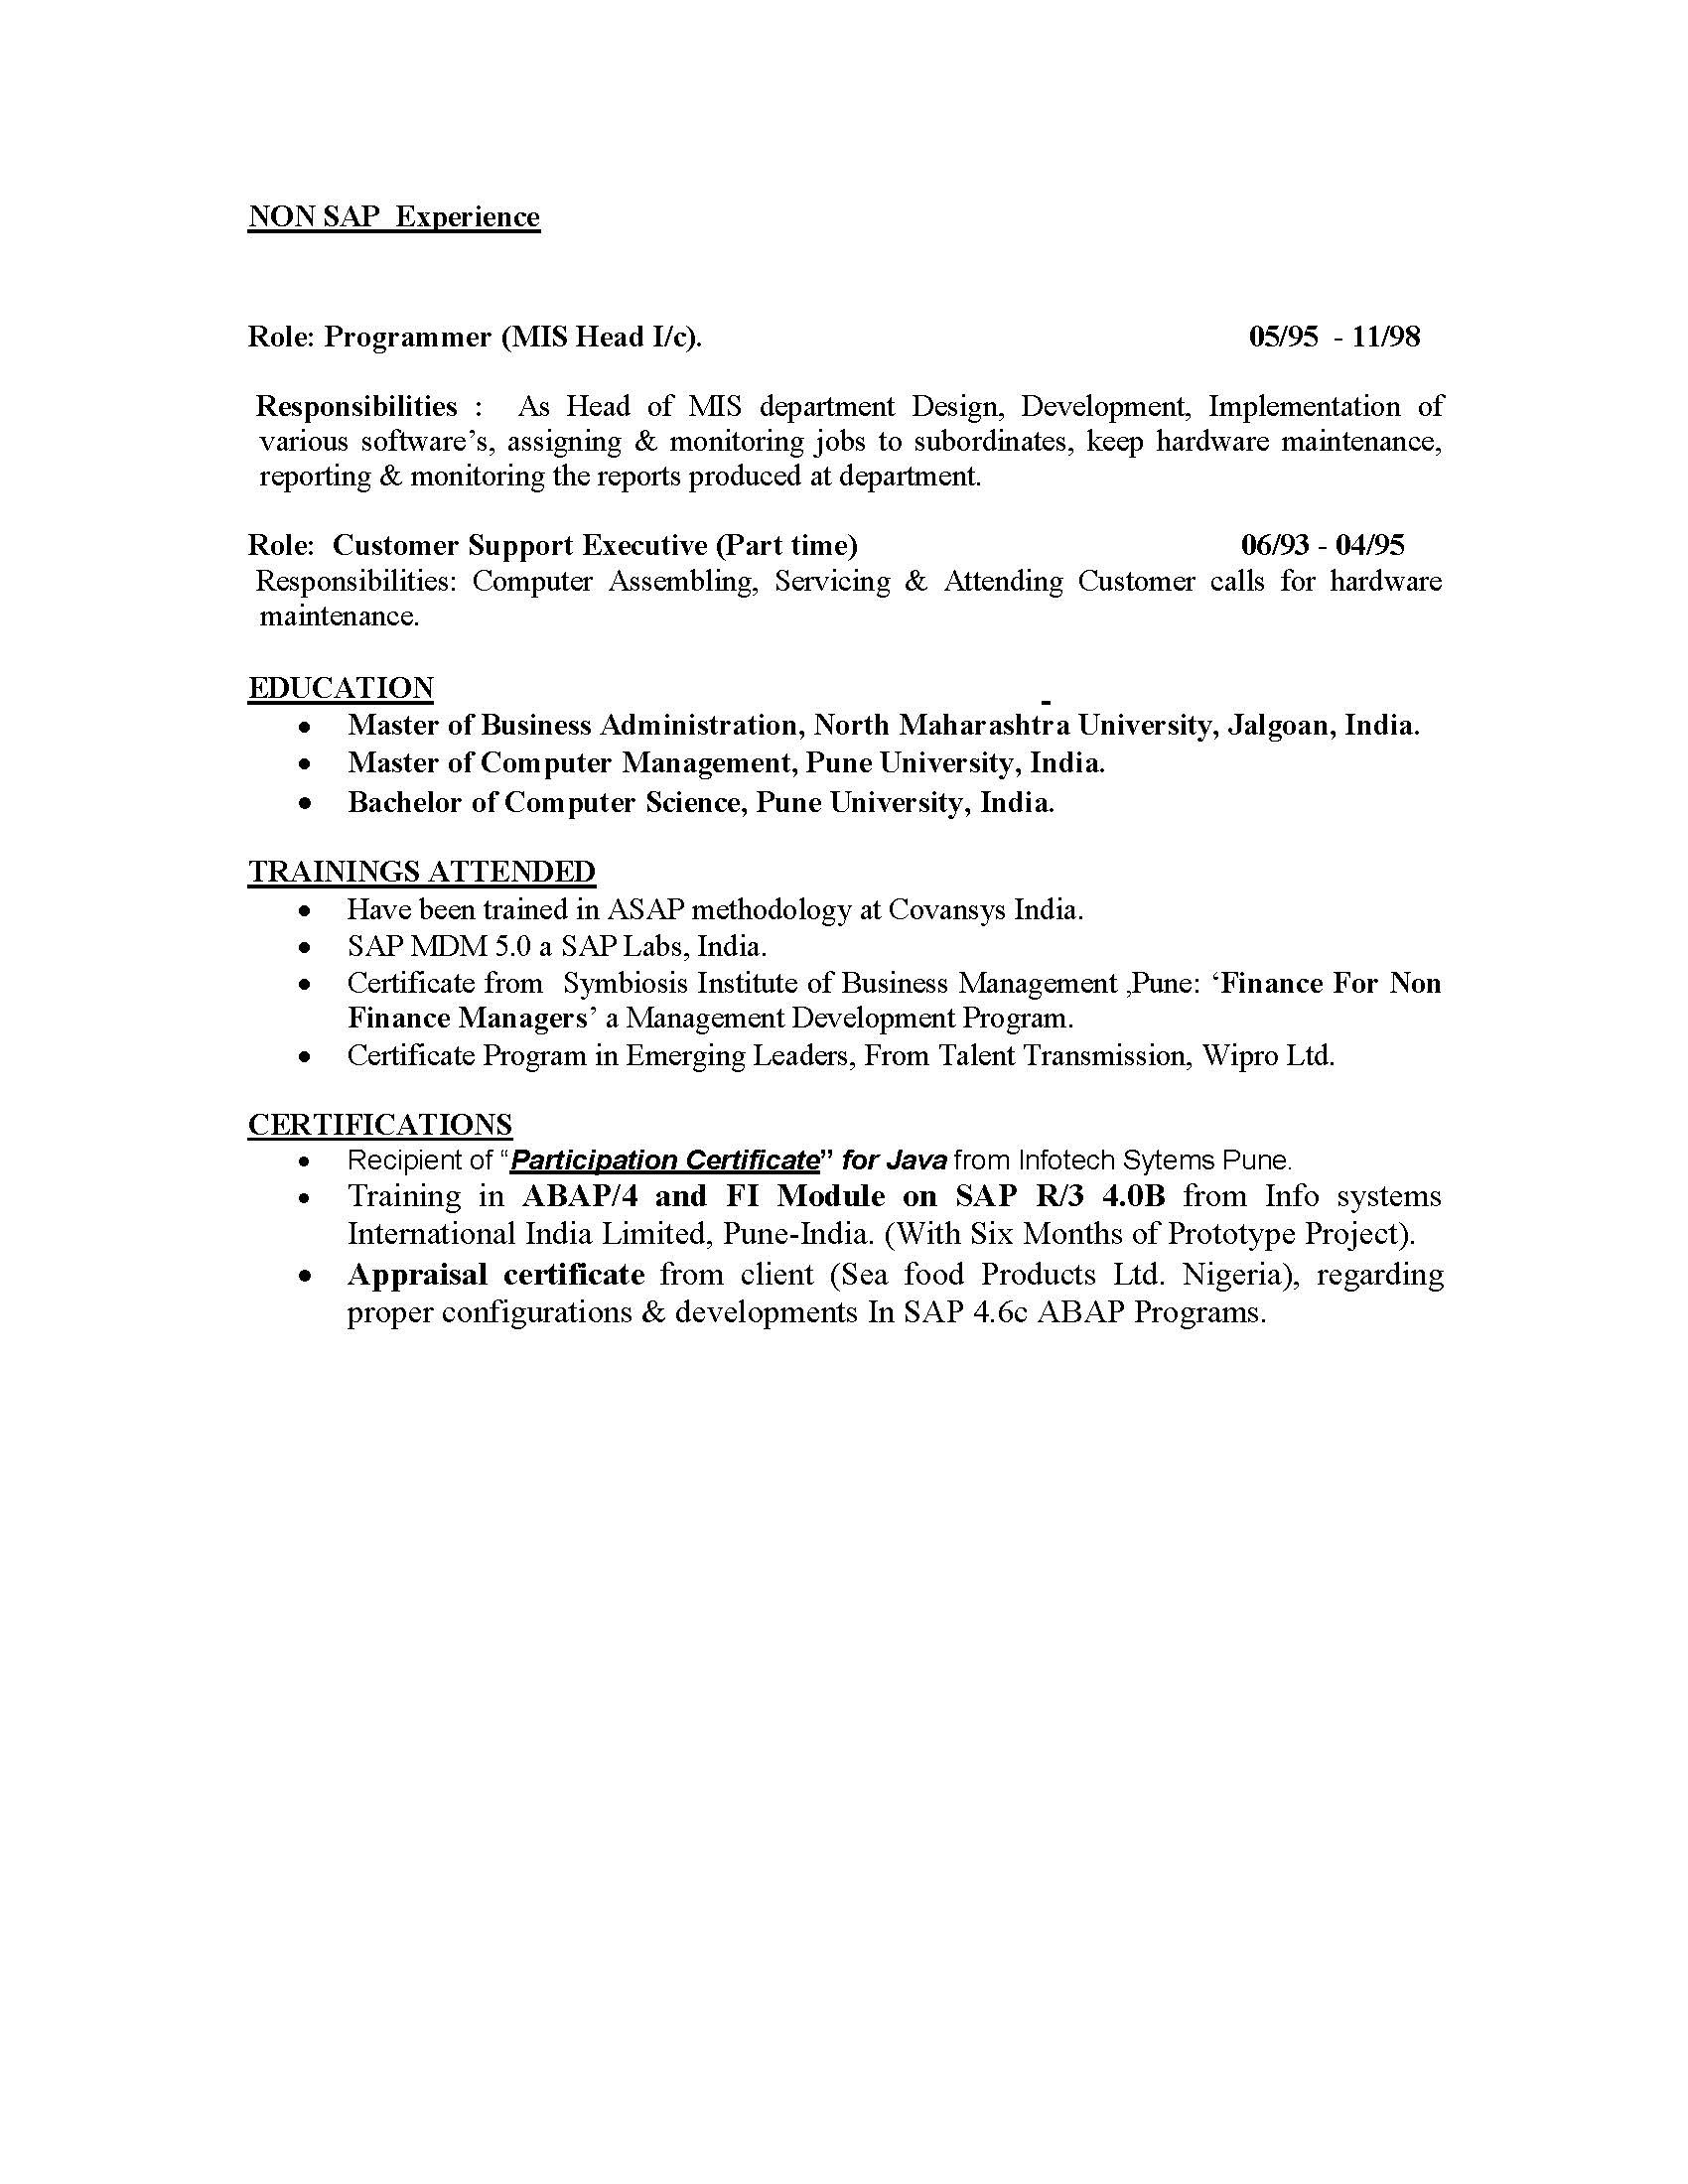 Sample Resume for Sap Mm Consultant Sap is Sample Resumes